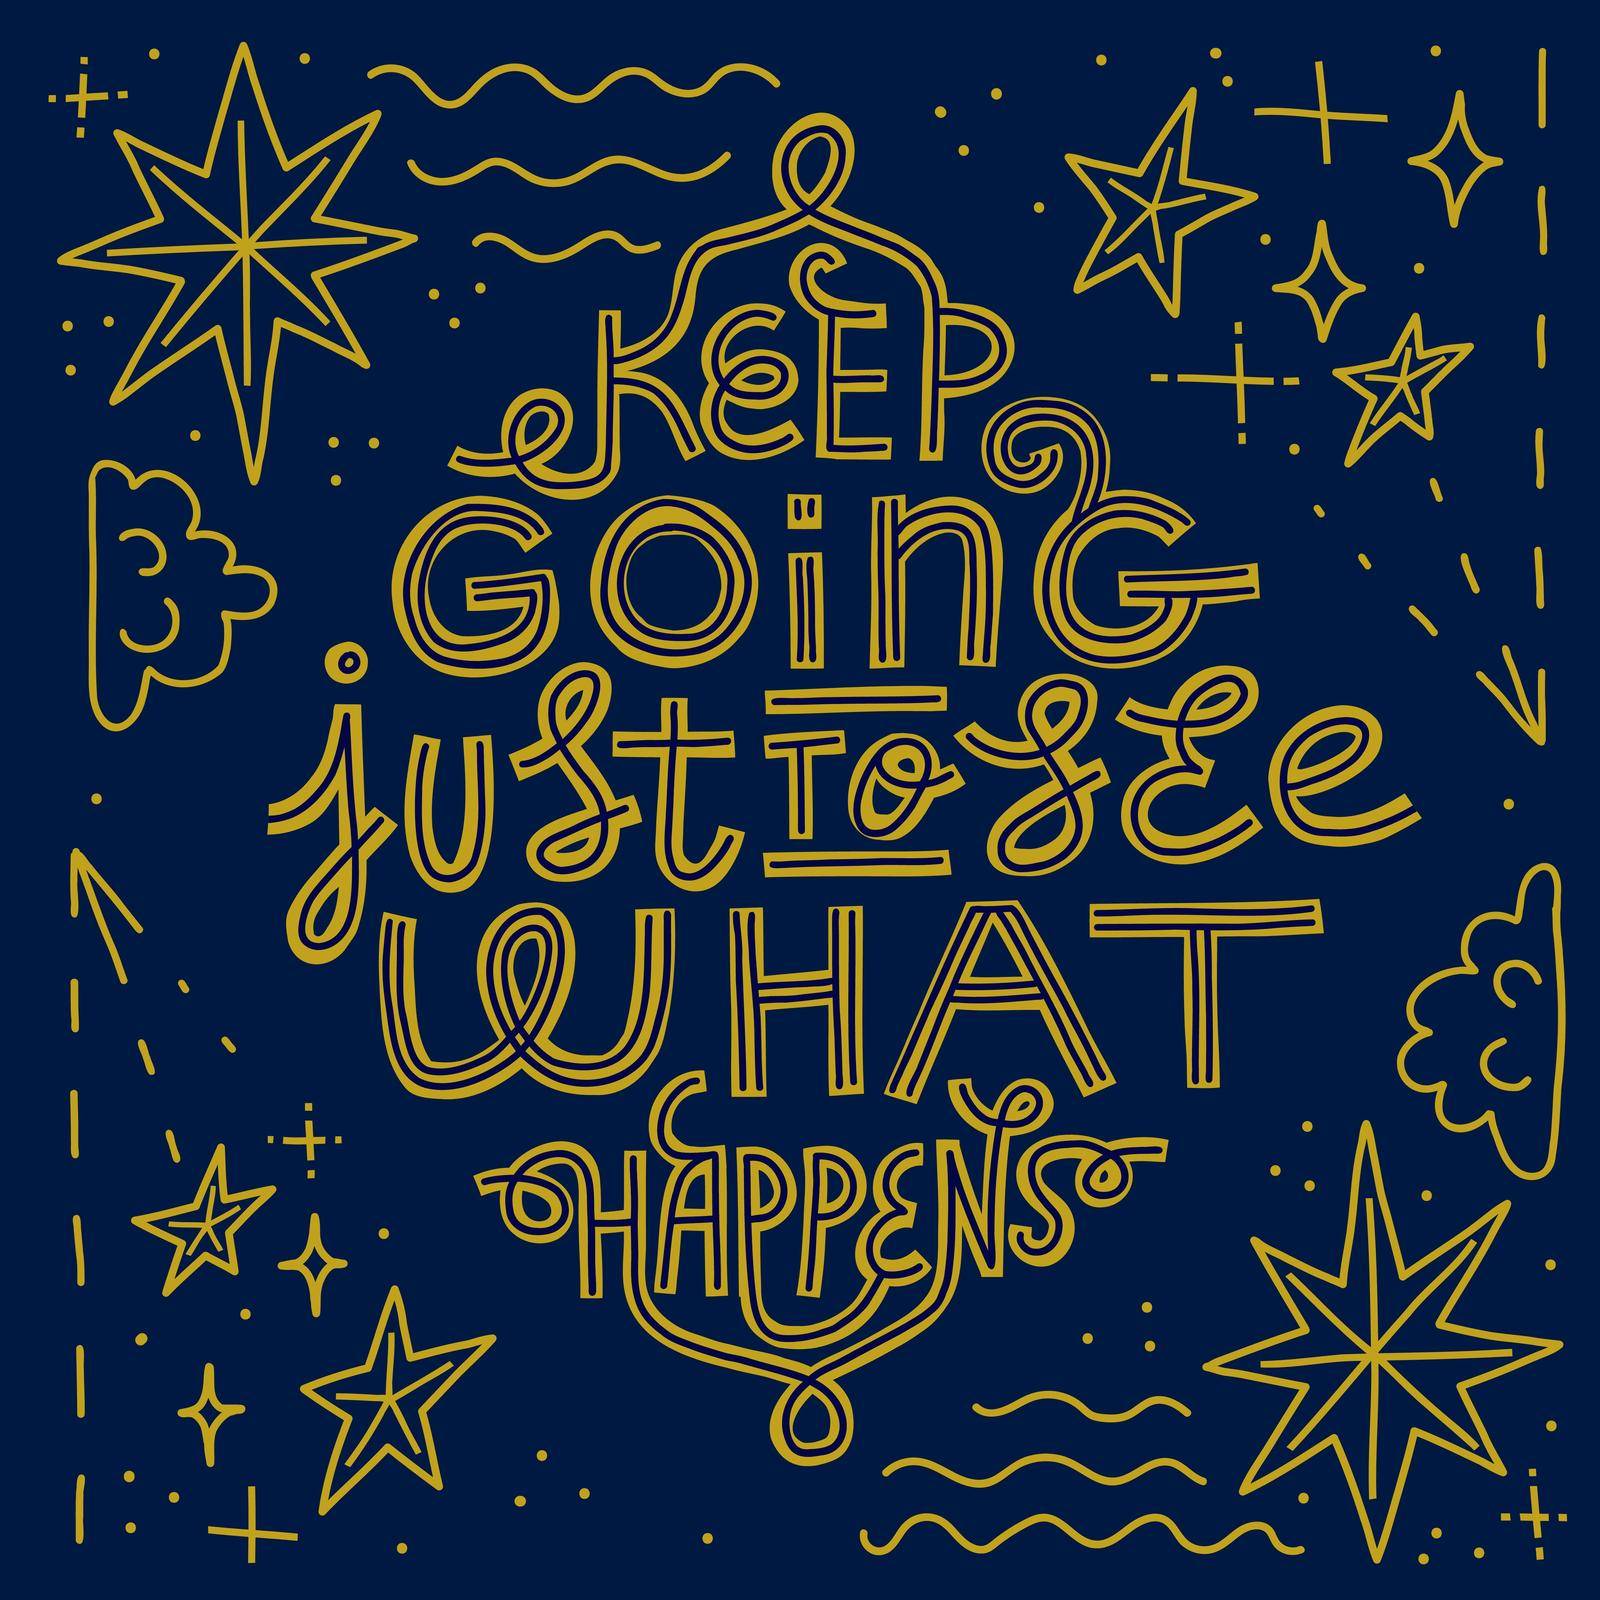 Keep going just to see what happens. Motivational quote poster. Hand-drawn lettering with abstract shapes on a square background. Gold on a dark blue background.